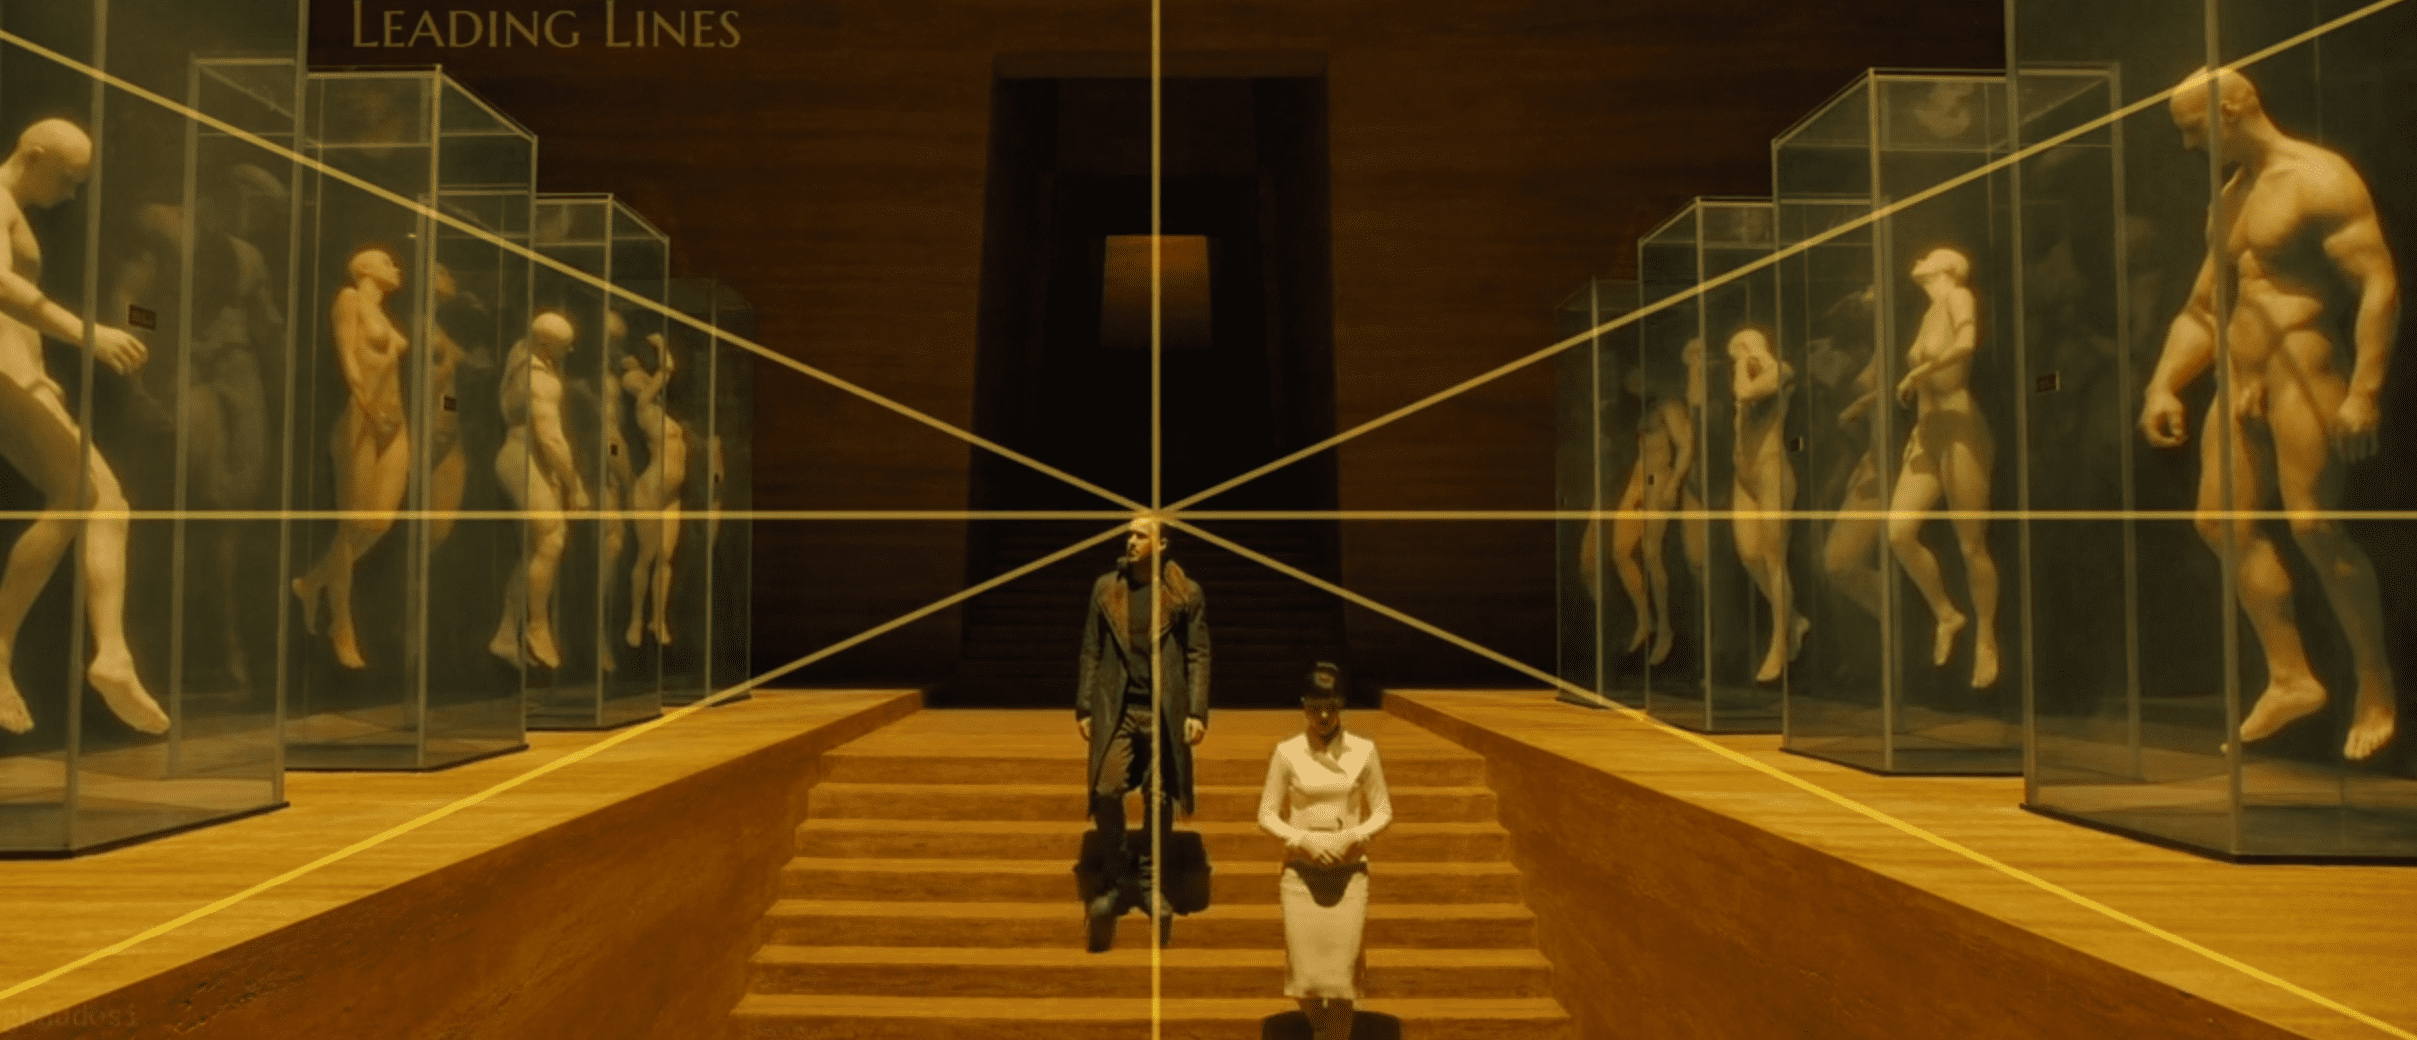 Man and woman descending stairs flanked by artificial humans